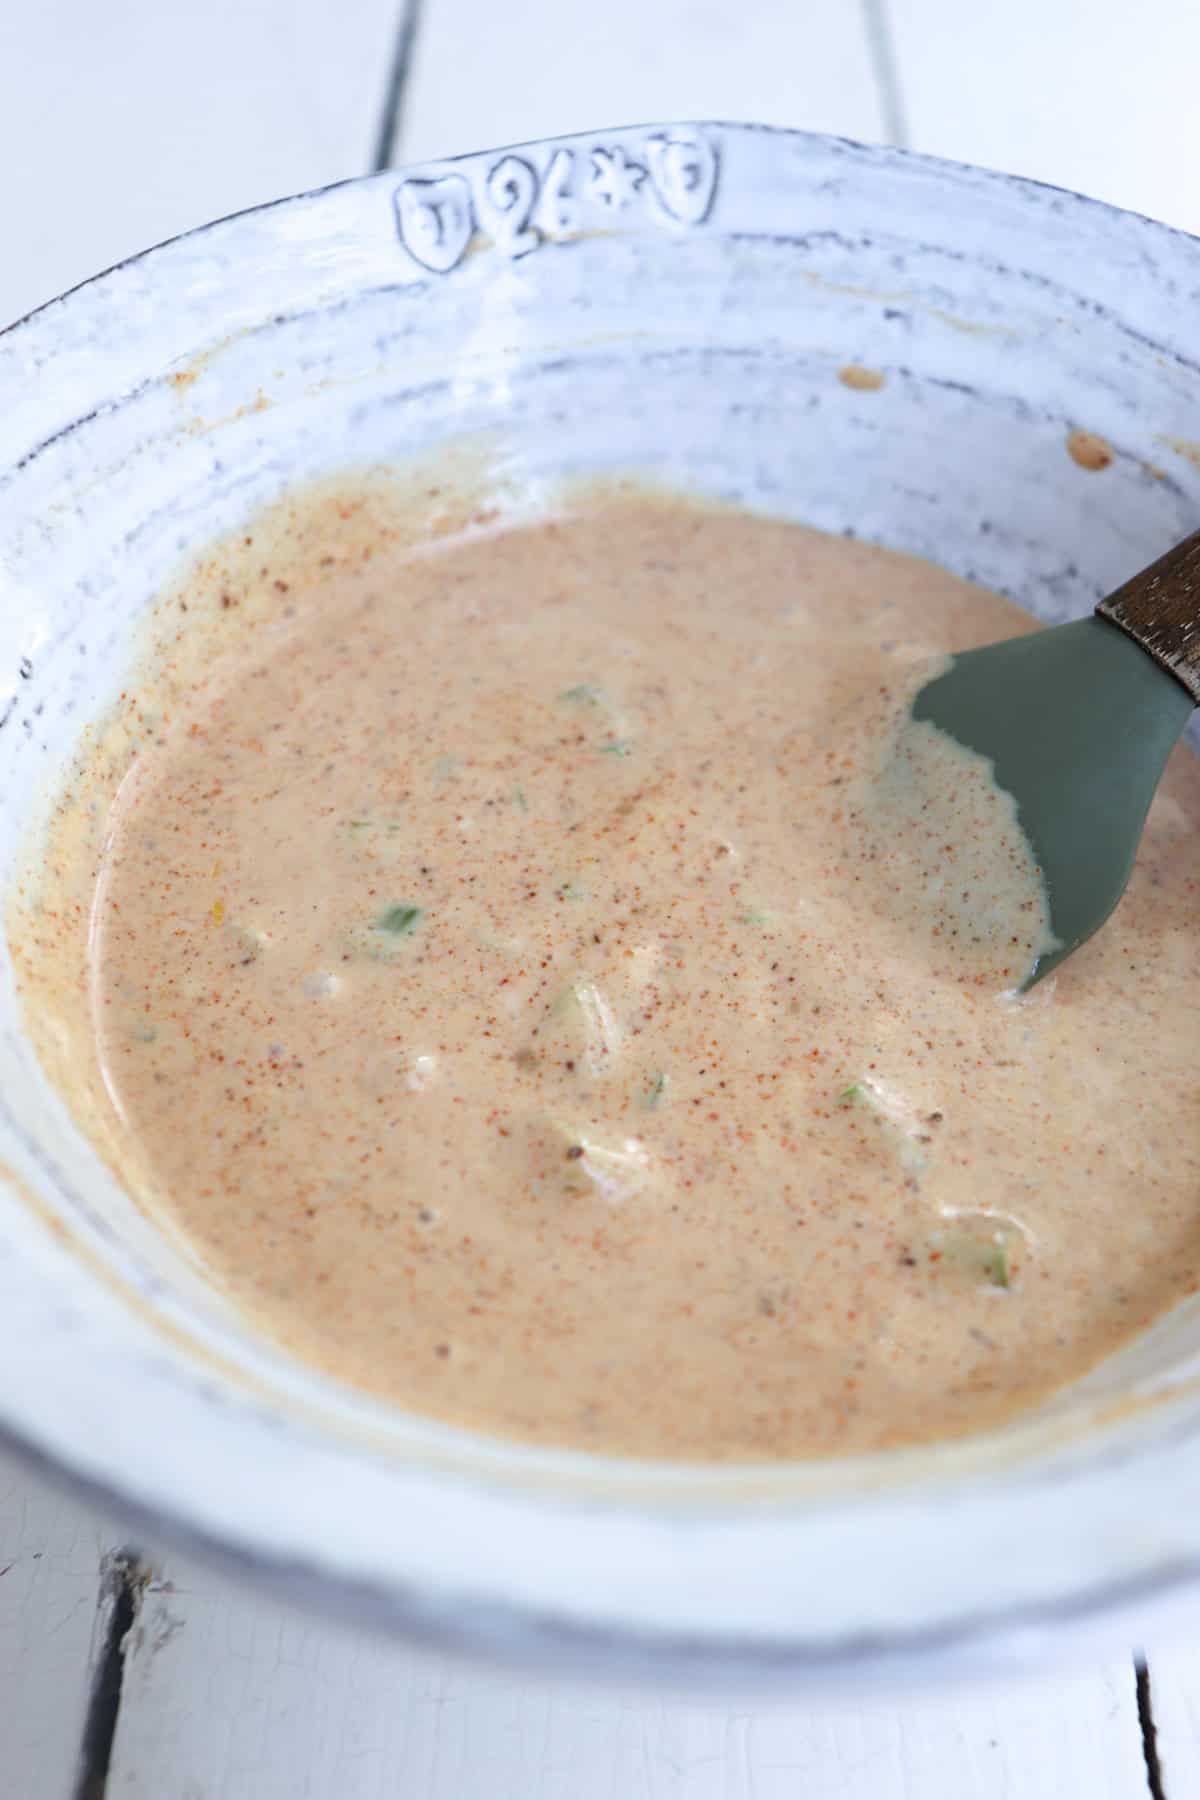 finished remoulade sauce in a white bowl with a small spatula.